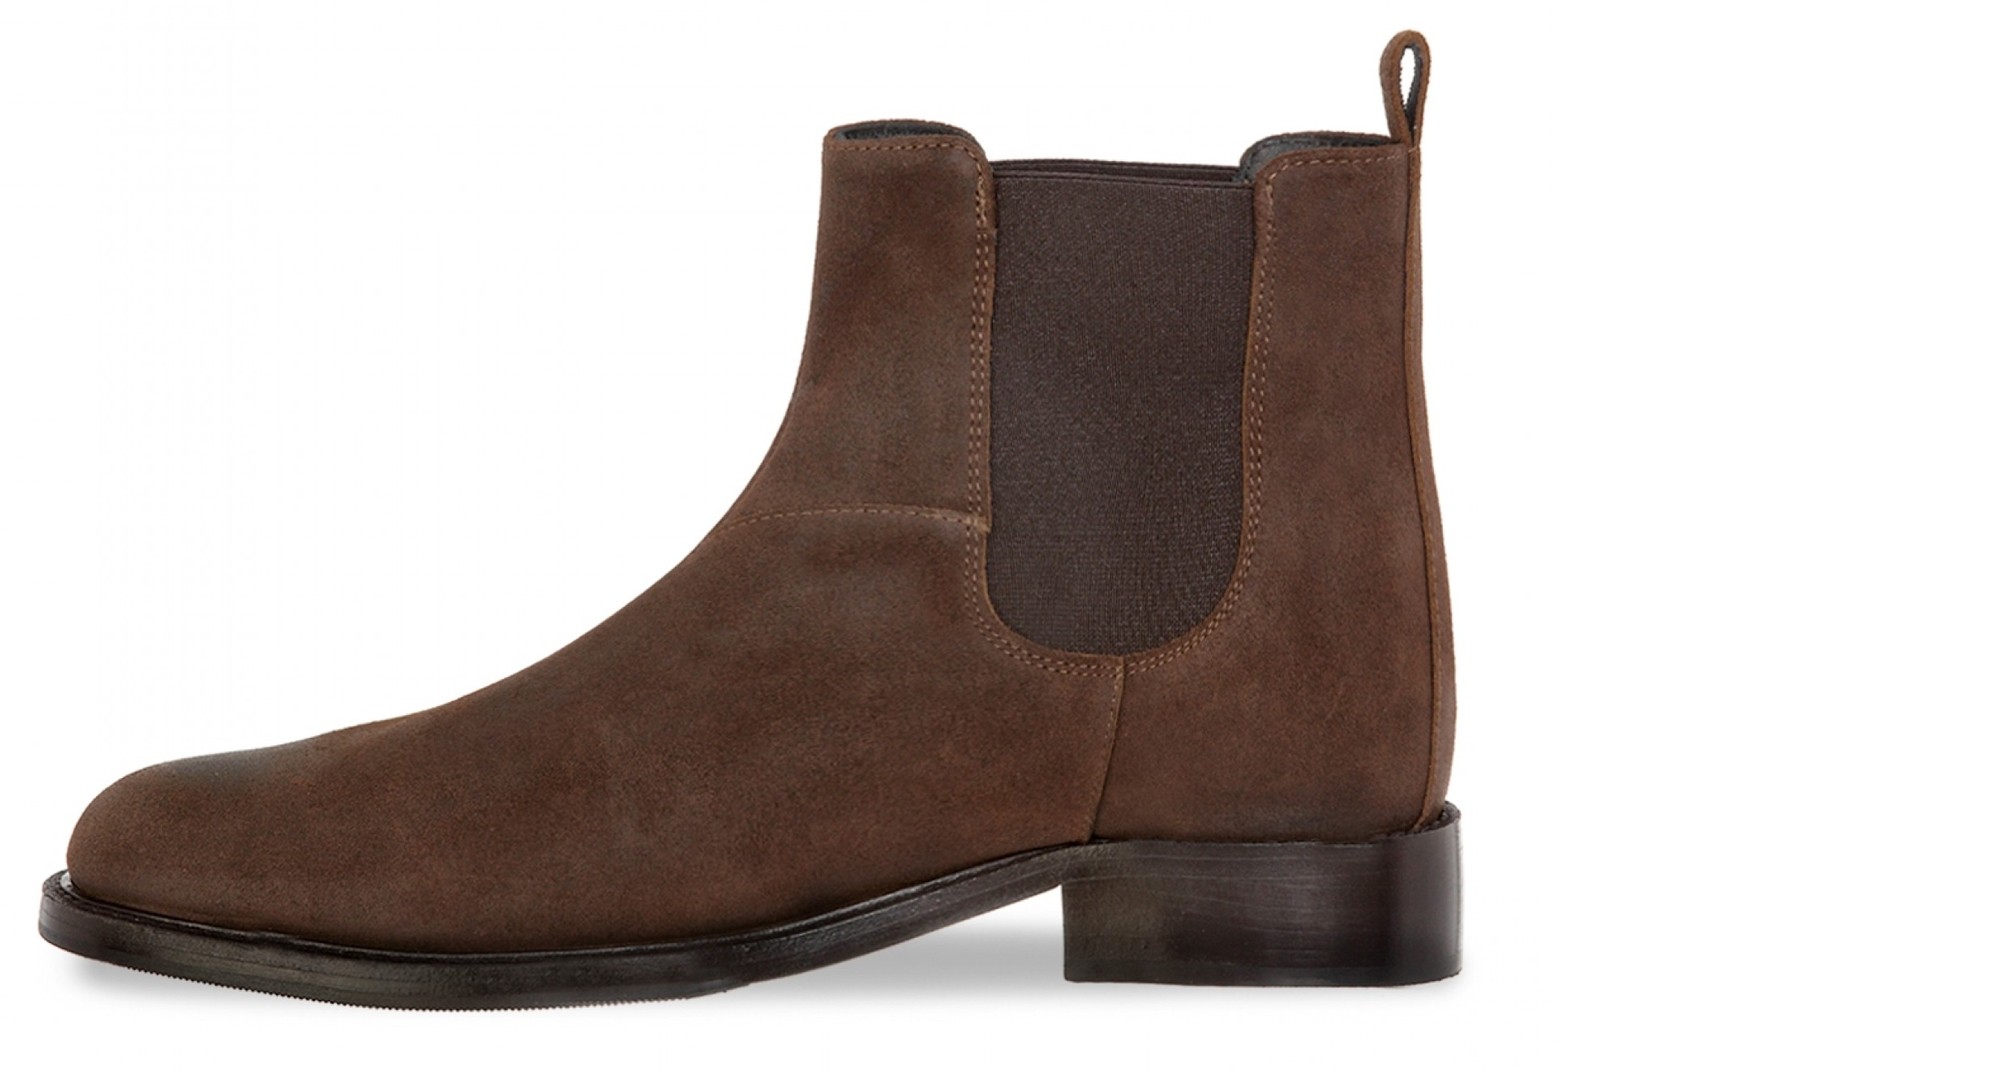 Fresno - Elevator Boots in Suede Leather from 2.4 to 4 inches